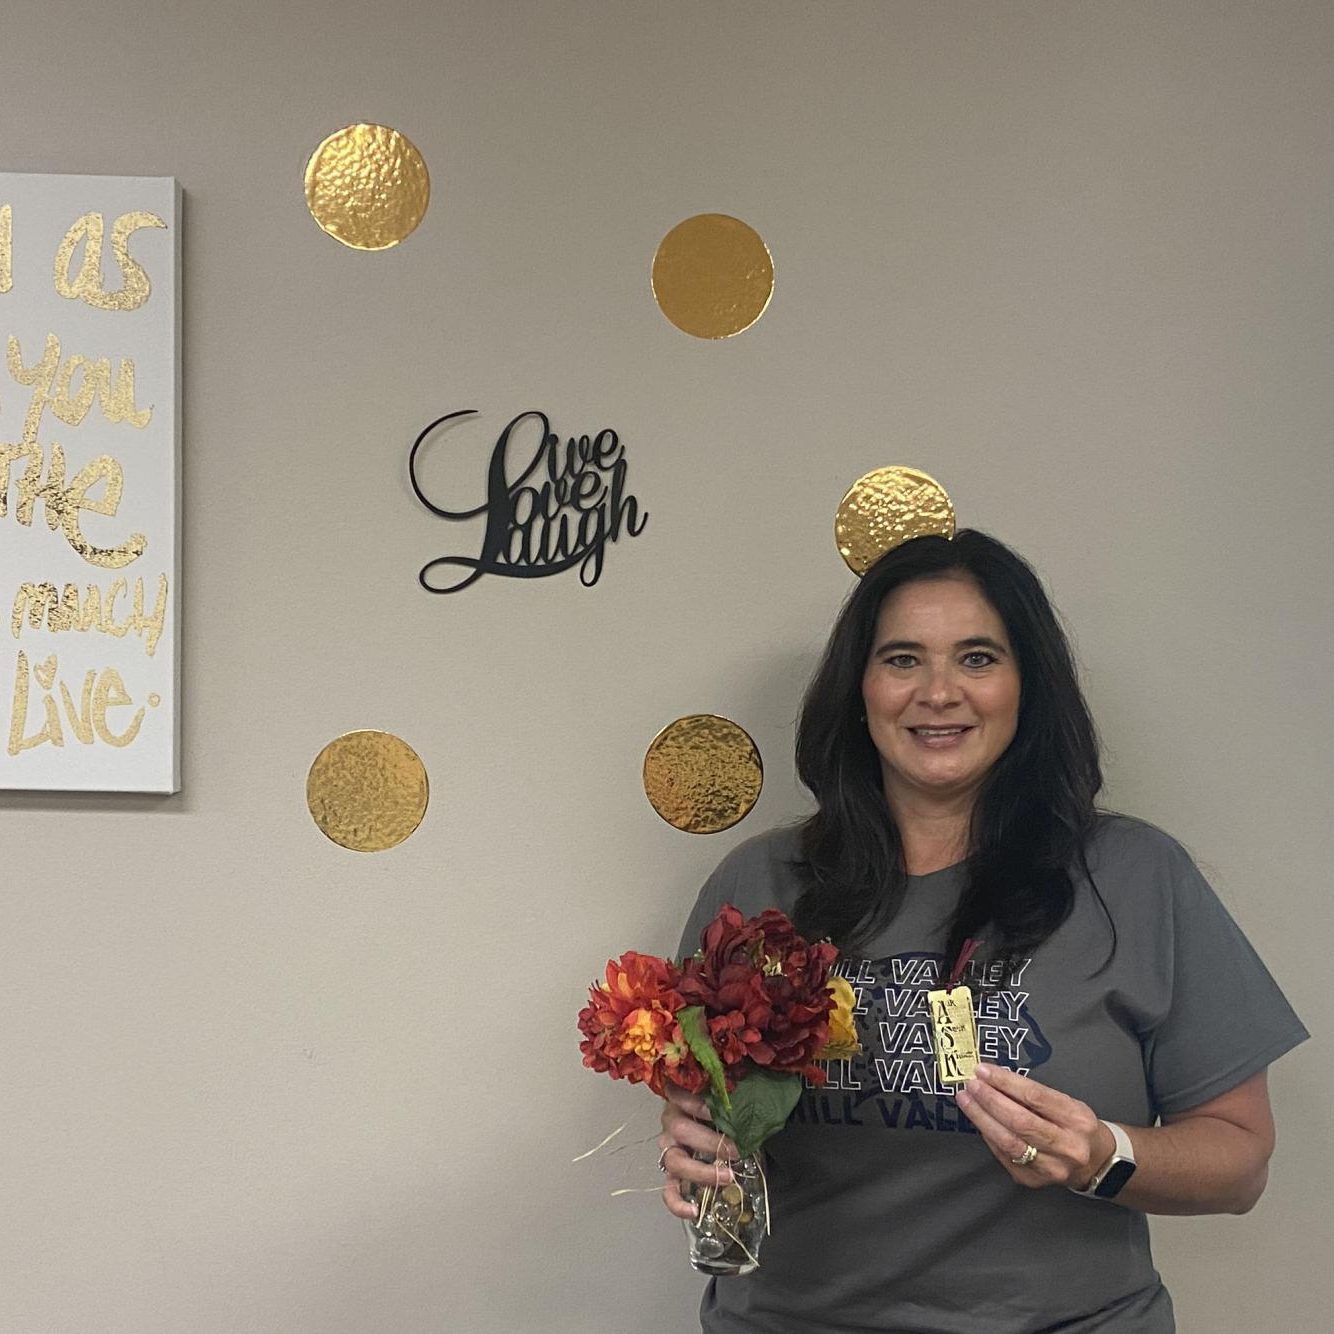 Ms. Swafford holds up two important items to her, flowers and her Ask, seek, knock. Her backdrop is a live, love, laugh sign along with a laugh as much as you breathe, love as much as you live canvas.  These items remind her that [shes] not alone, and [shes] happy.